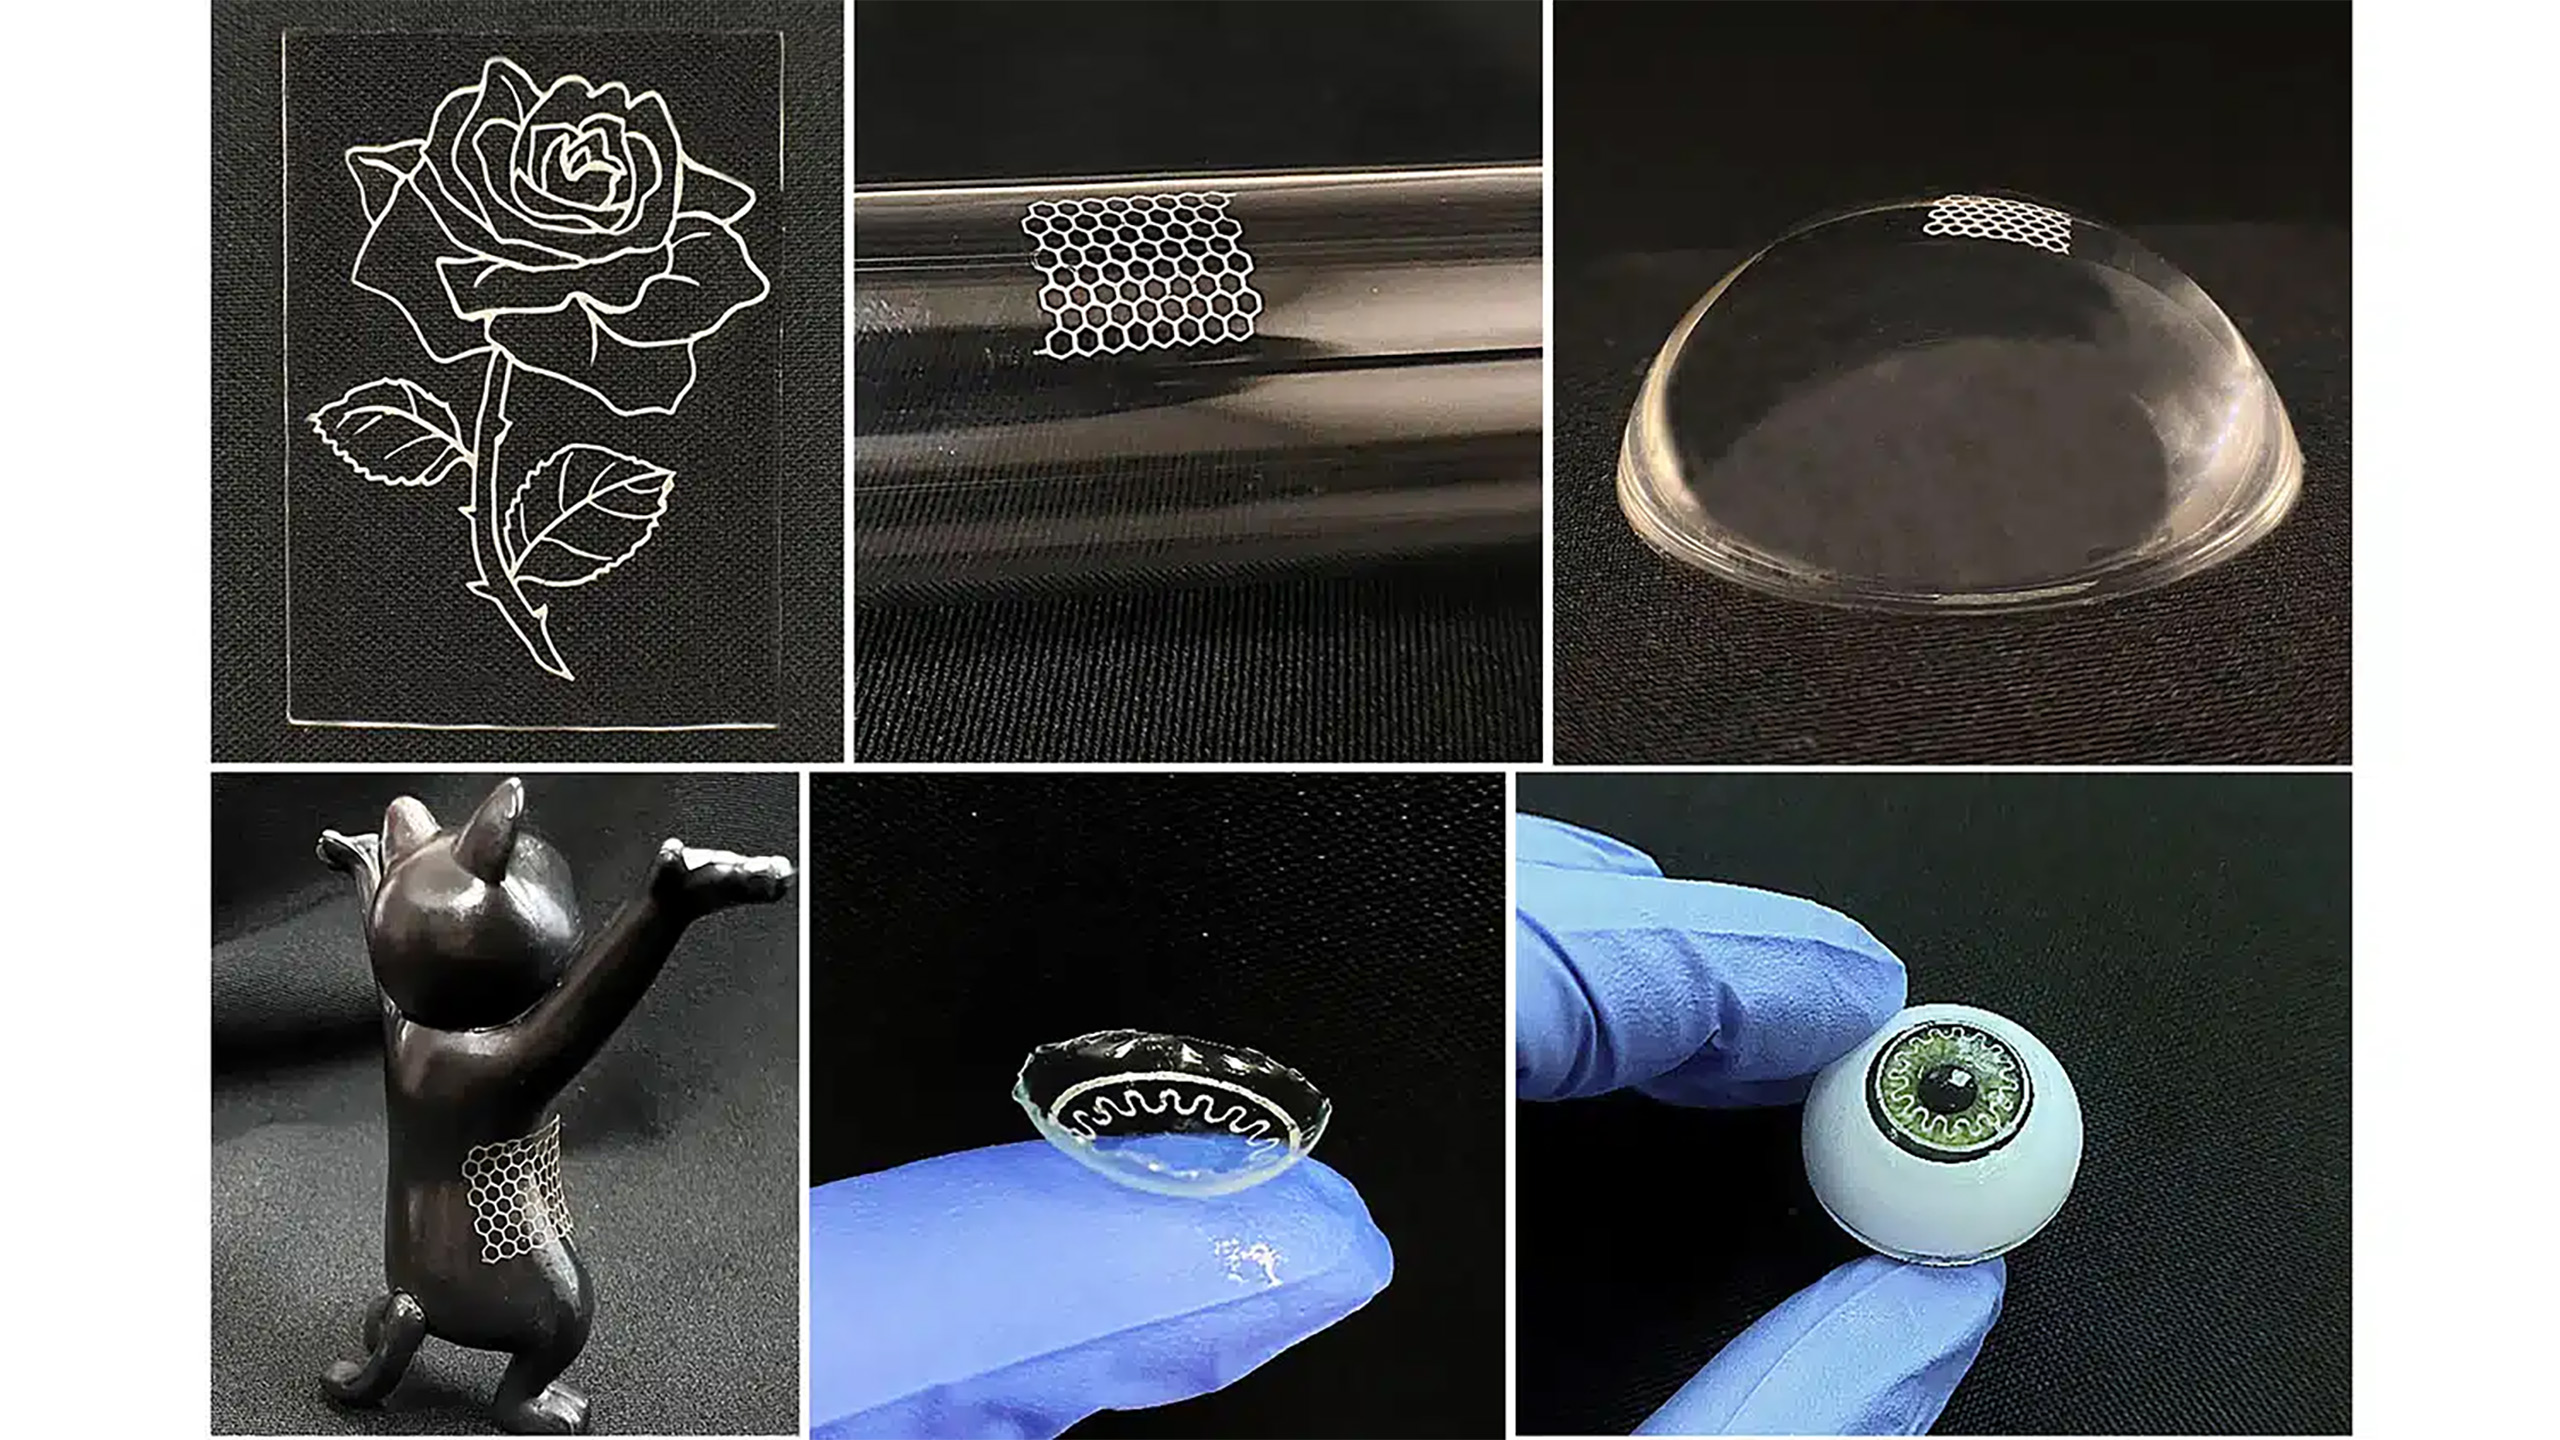 Technique Prints Flexible Circuits on Curved Surfaces, From Contact Lenses to Latex Gloves